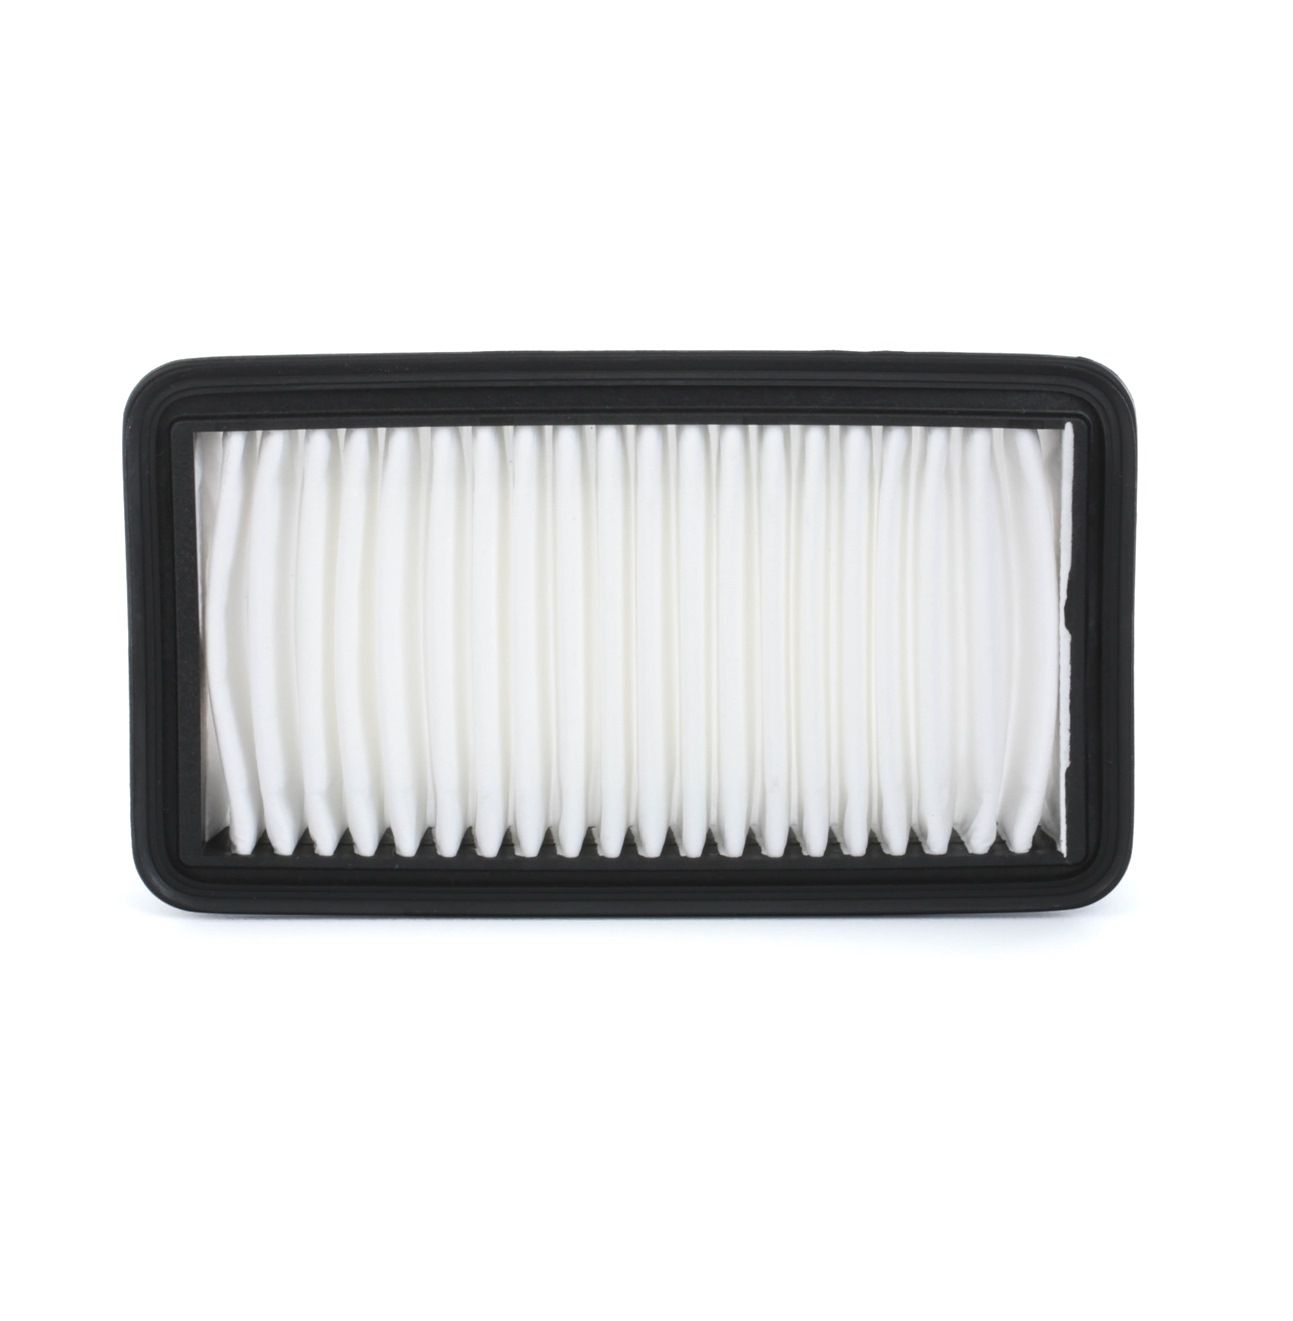 Mercedes A-Class Engine filter 7506479 NIPPARTS J1328037 online buy